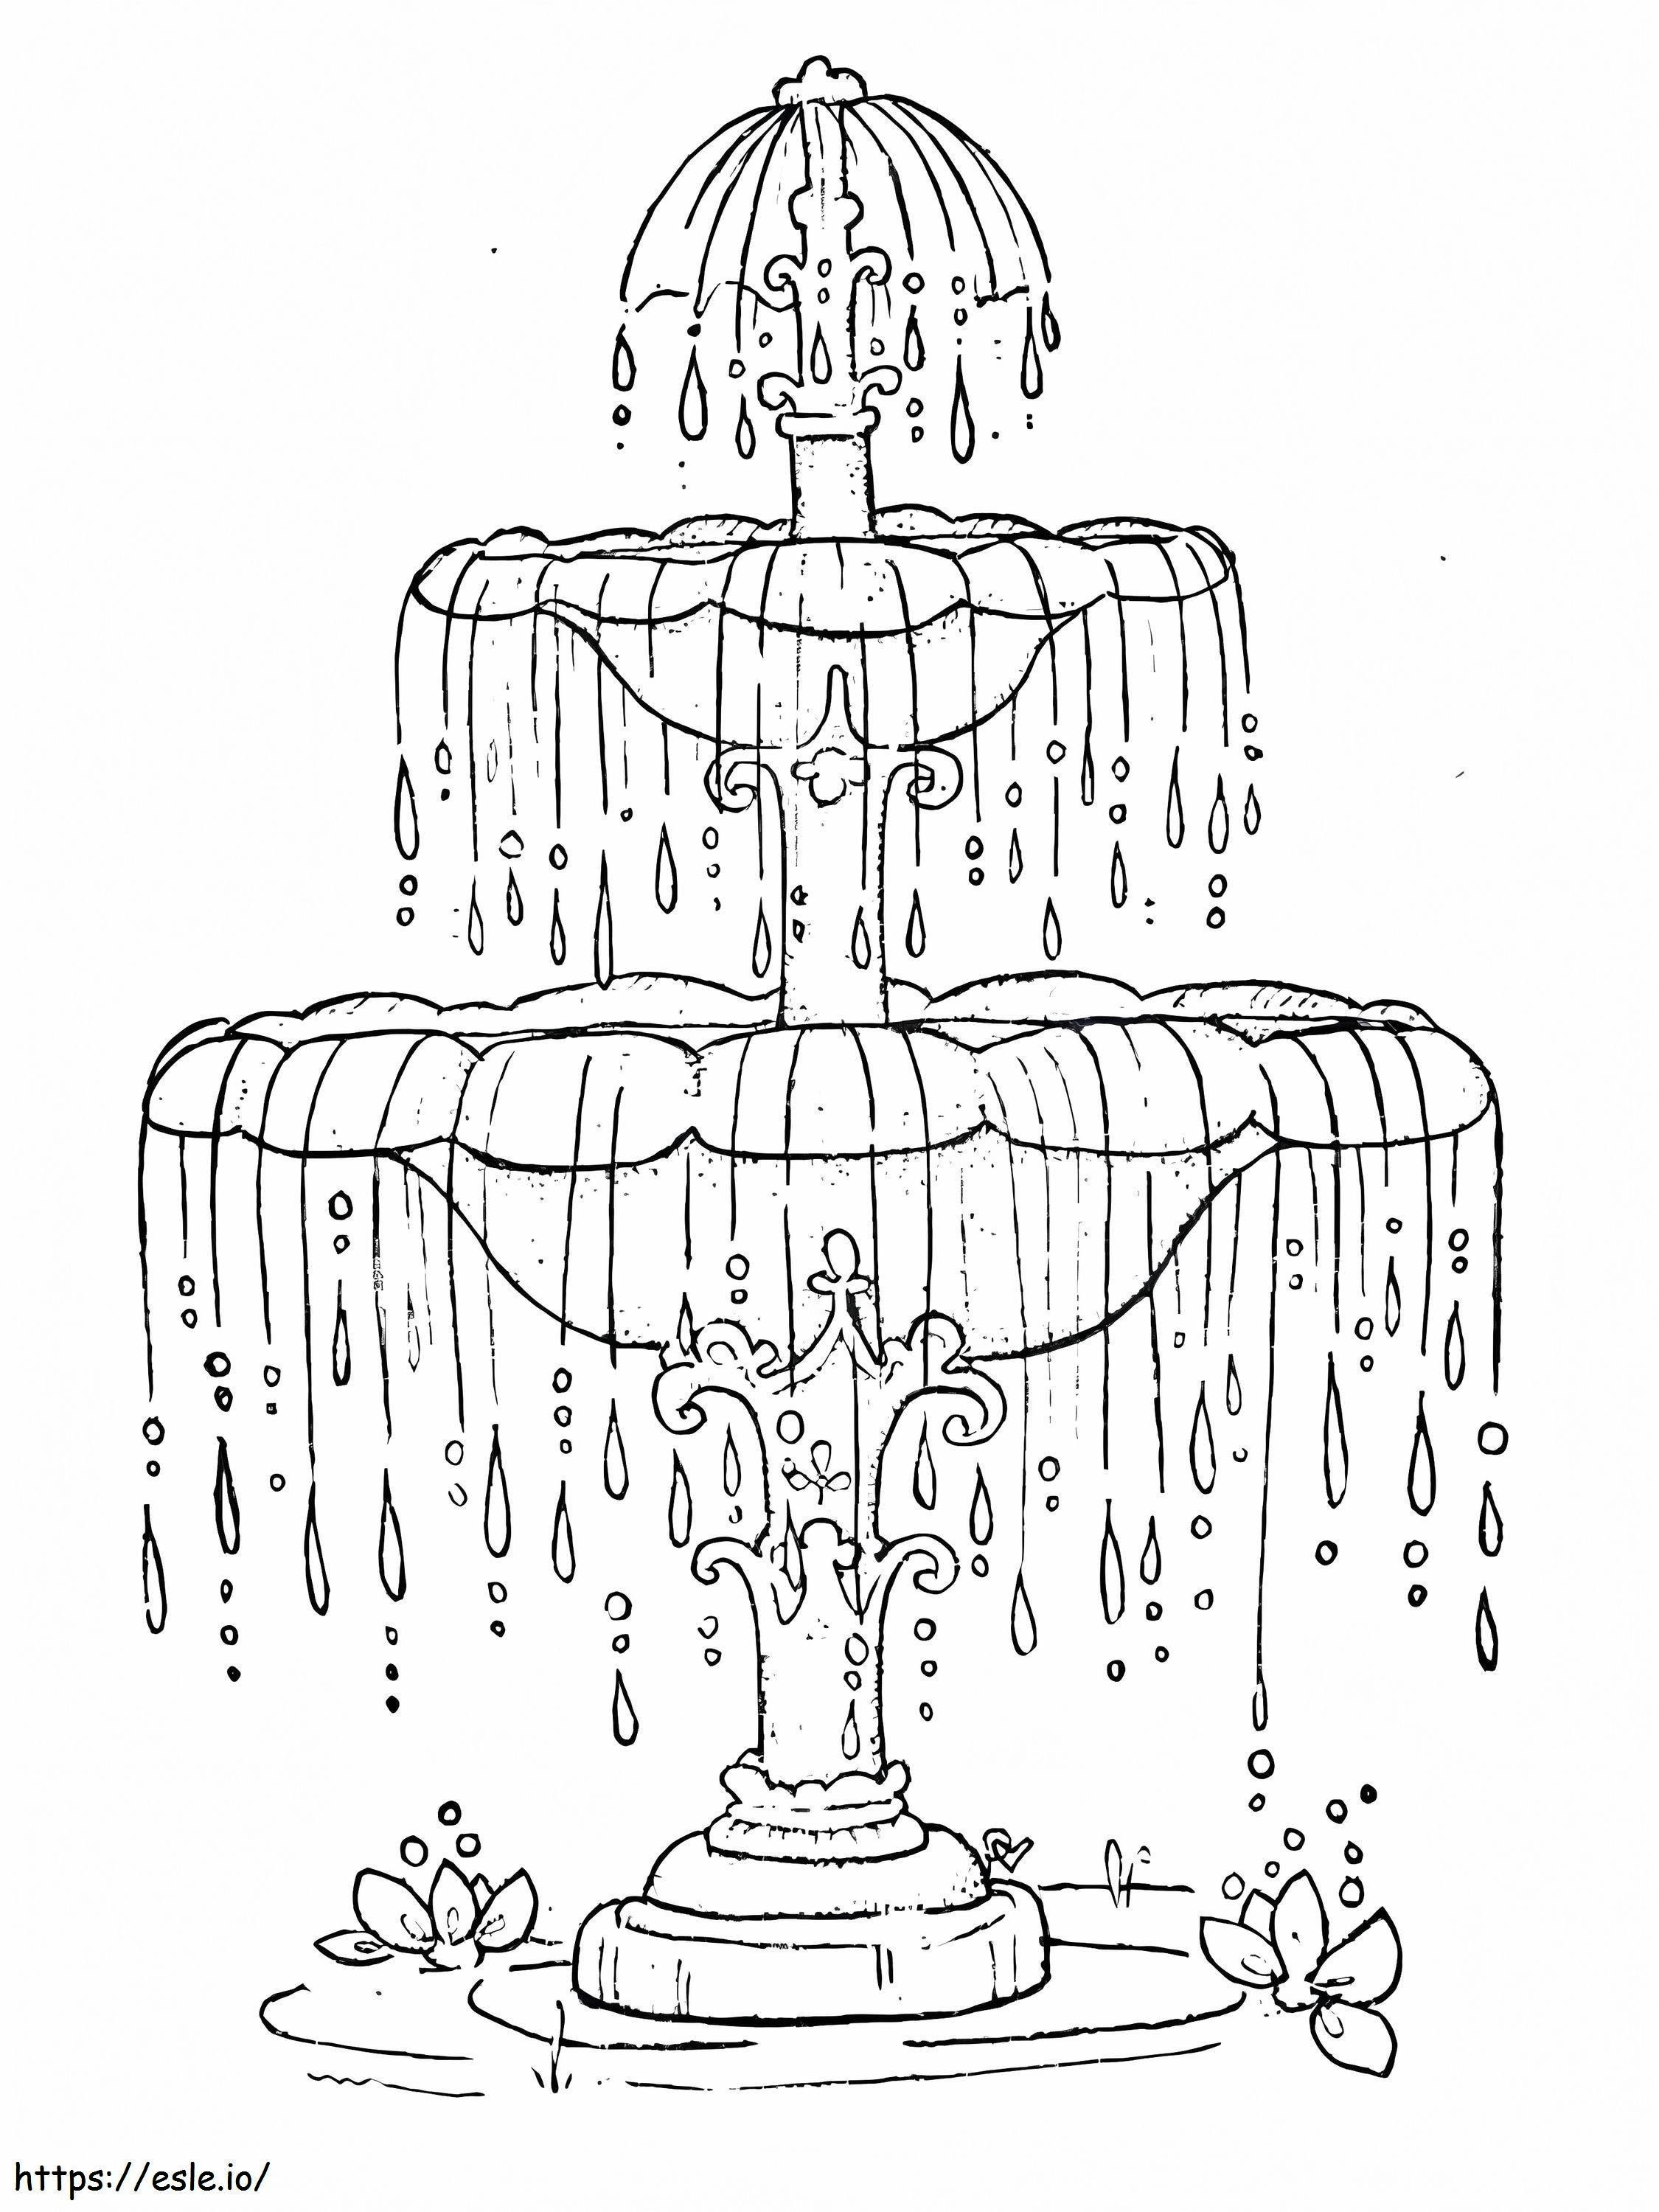 Amazing Fountain coloring page